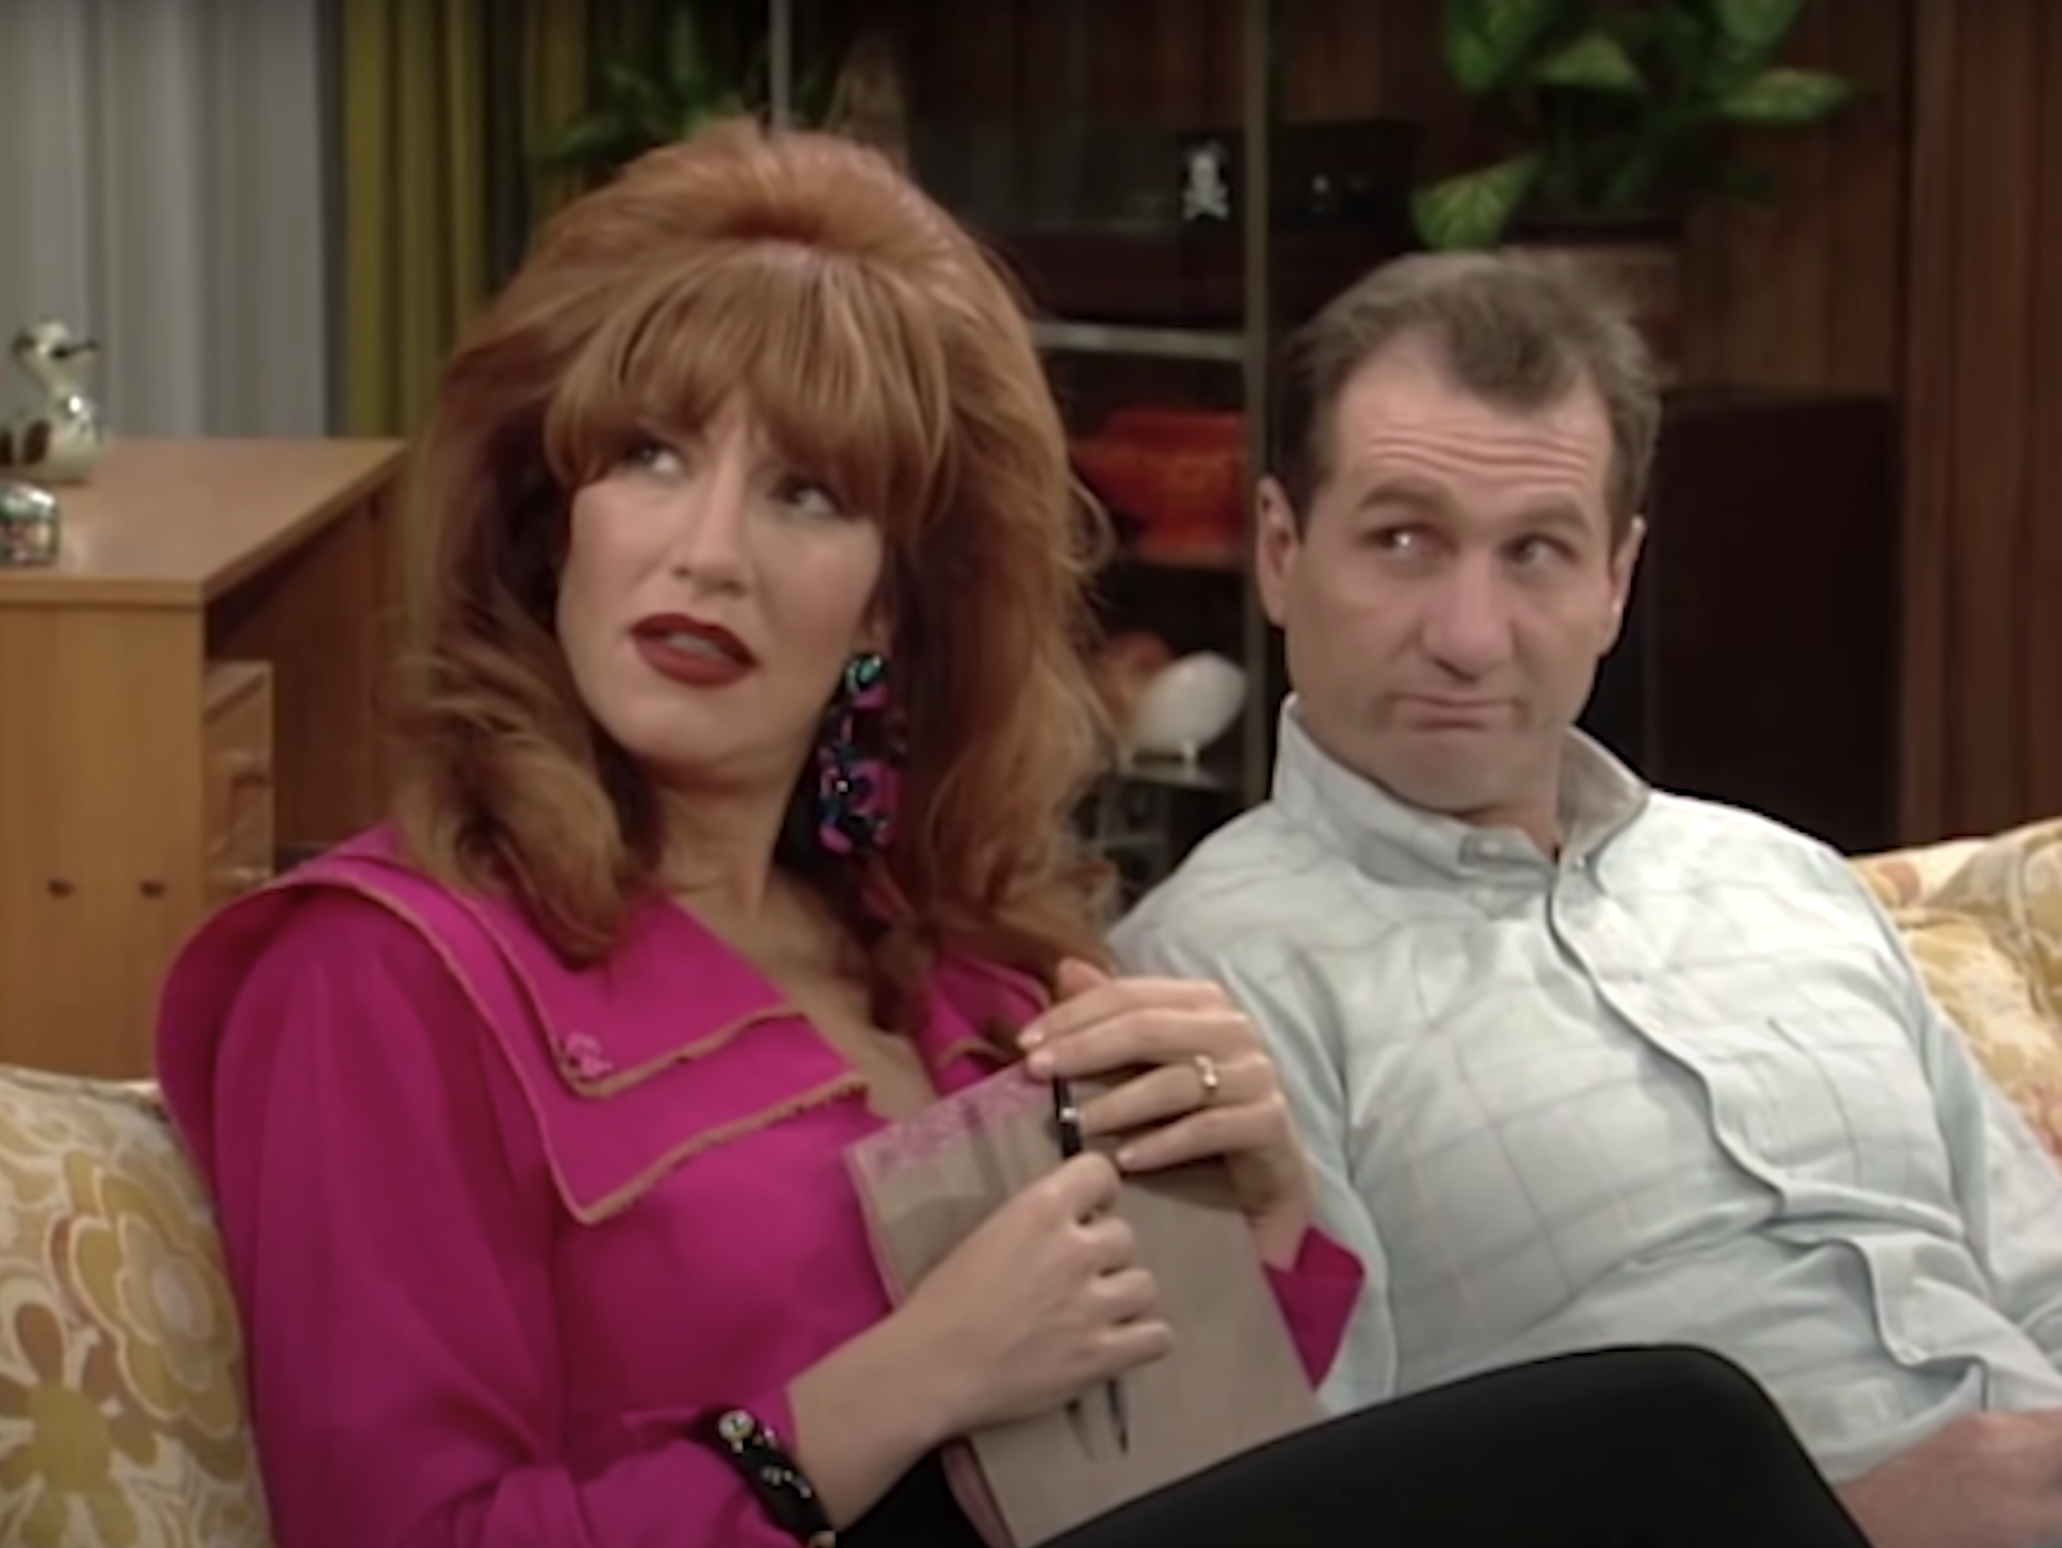 Al Bundy and Peggy sitting on the couch